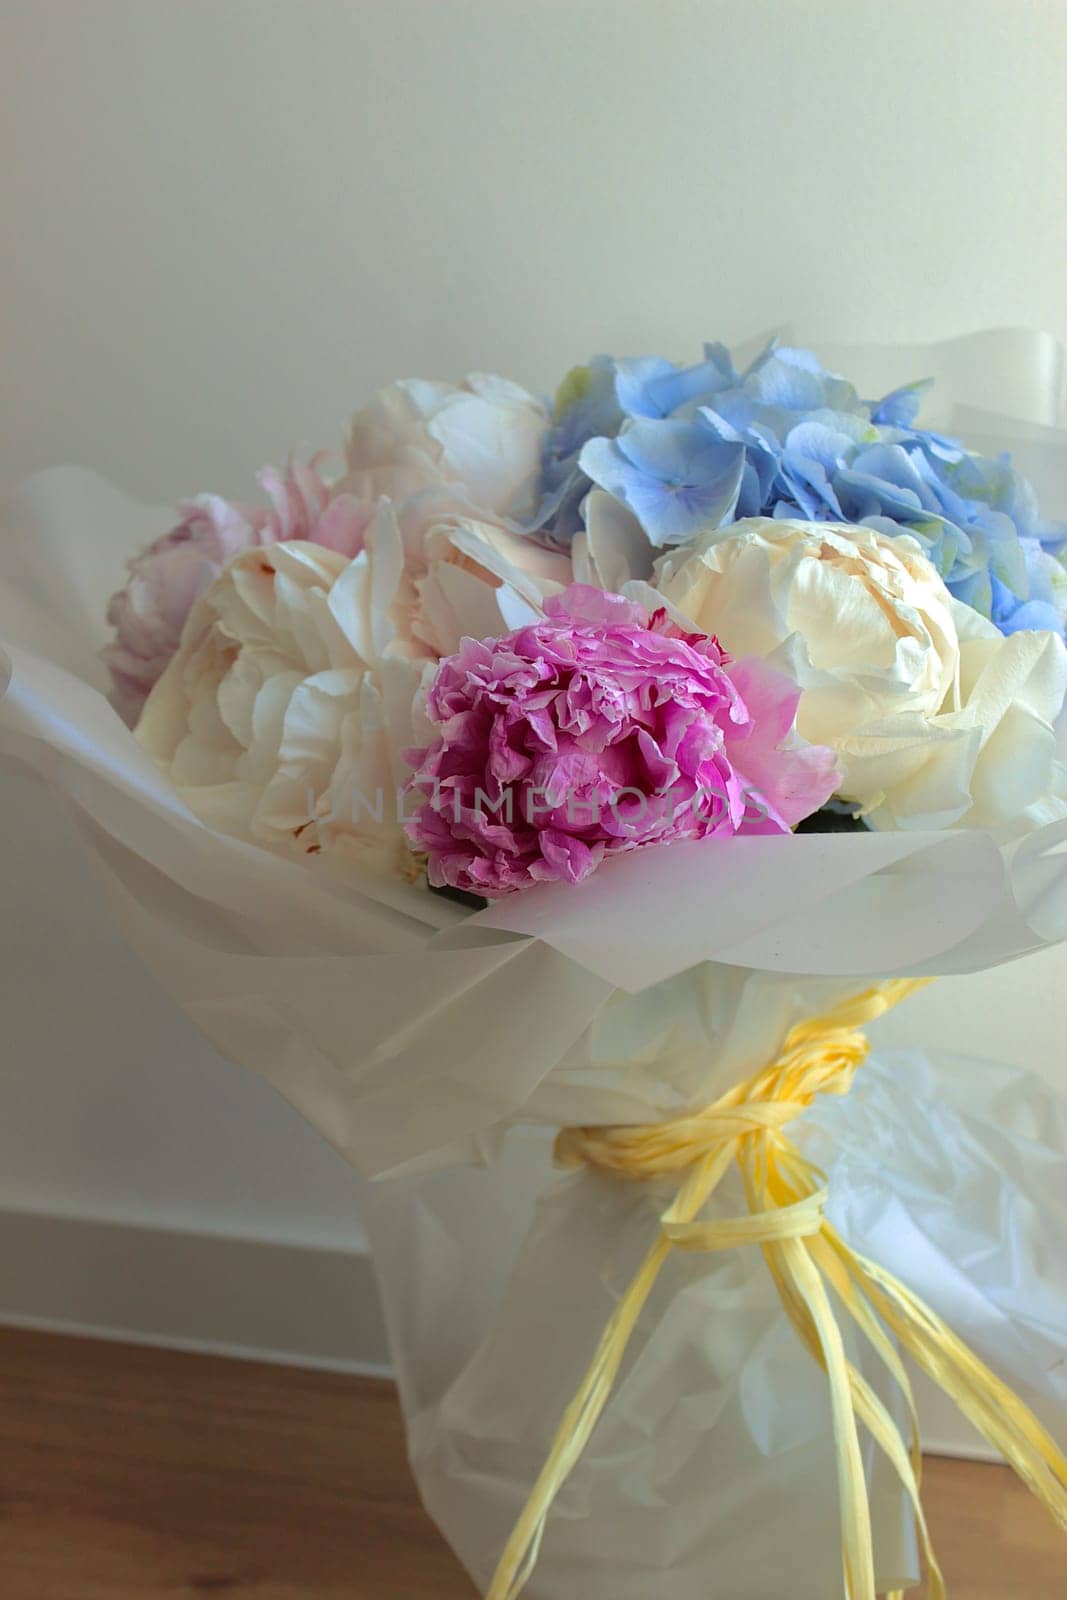 A bouquet of blooming white and pink peonies of delicate color. High quality photo